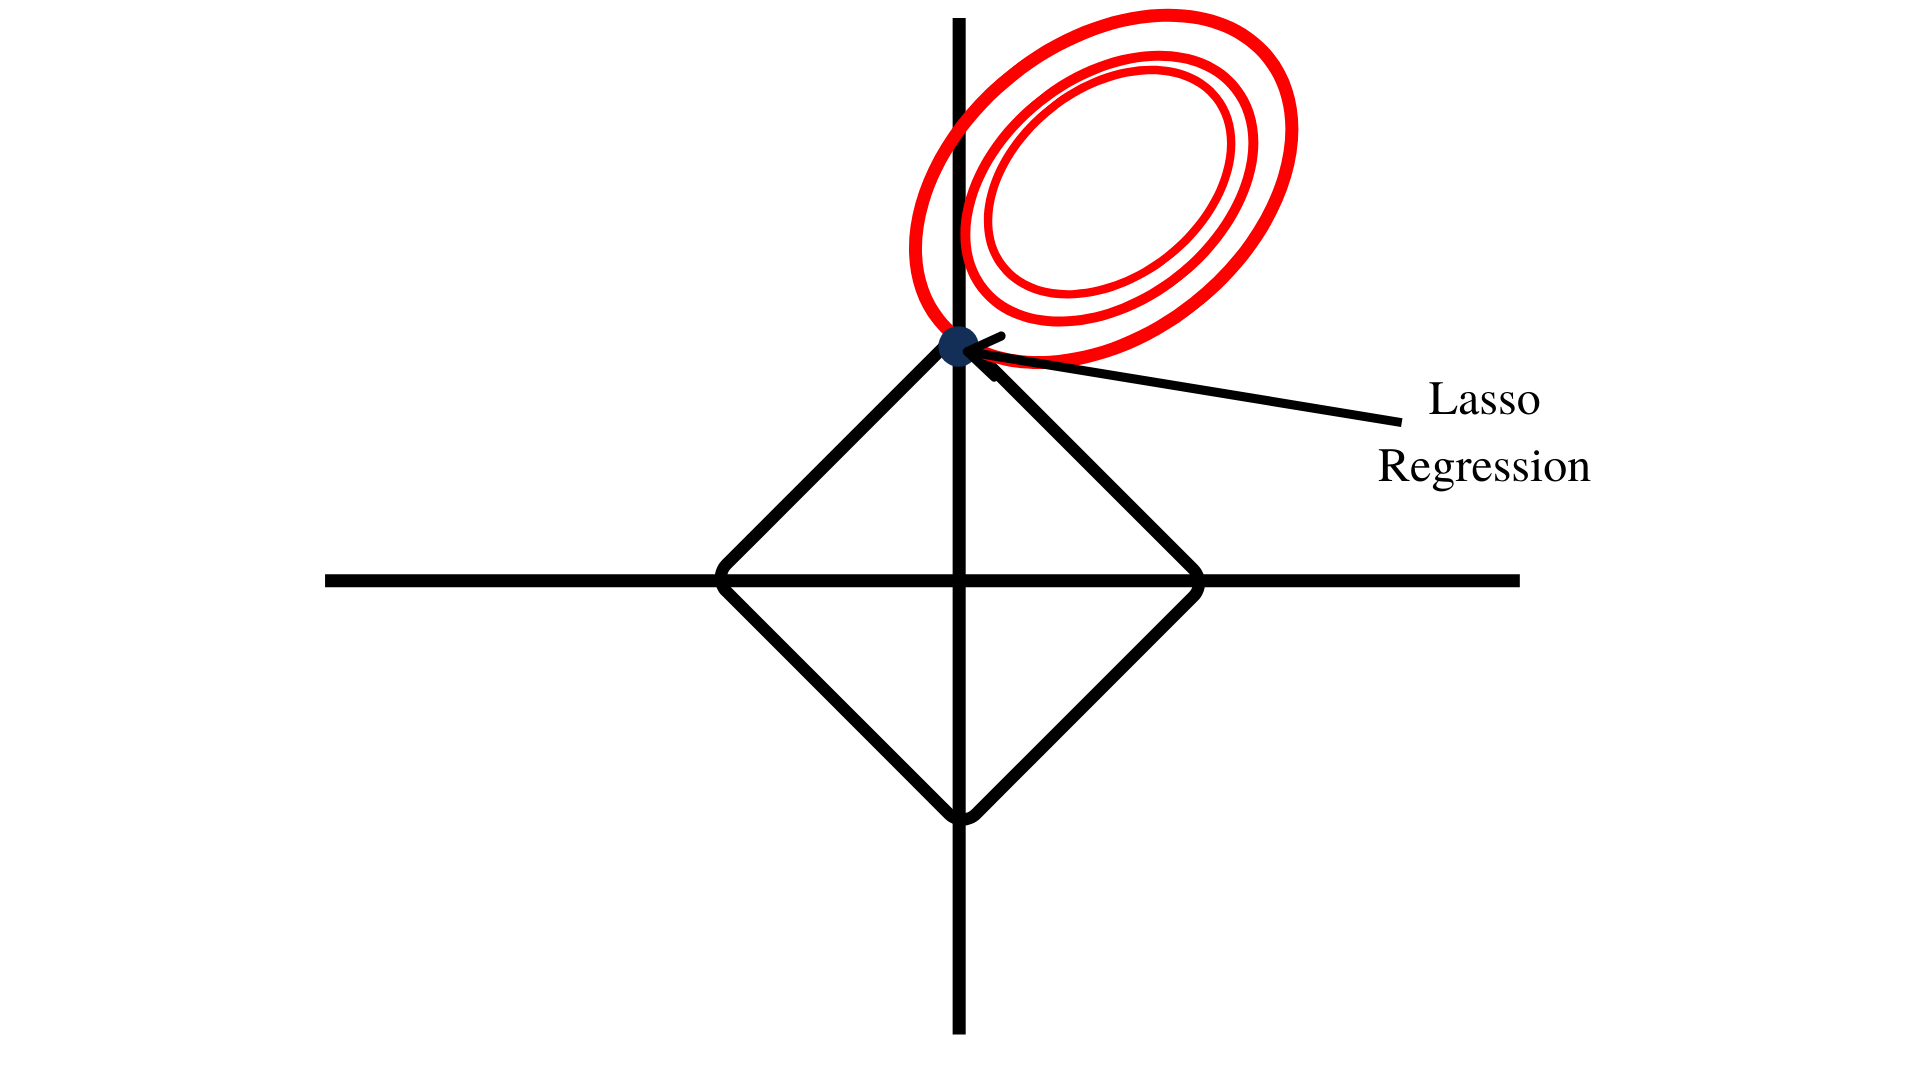 LASSO - Definition, Estimation, Uses and Geometry